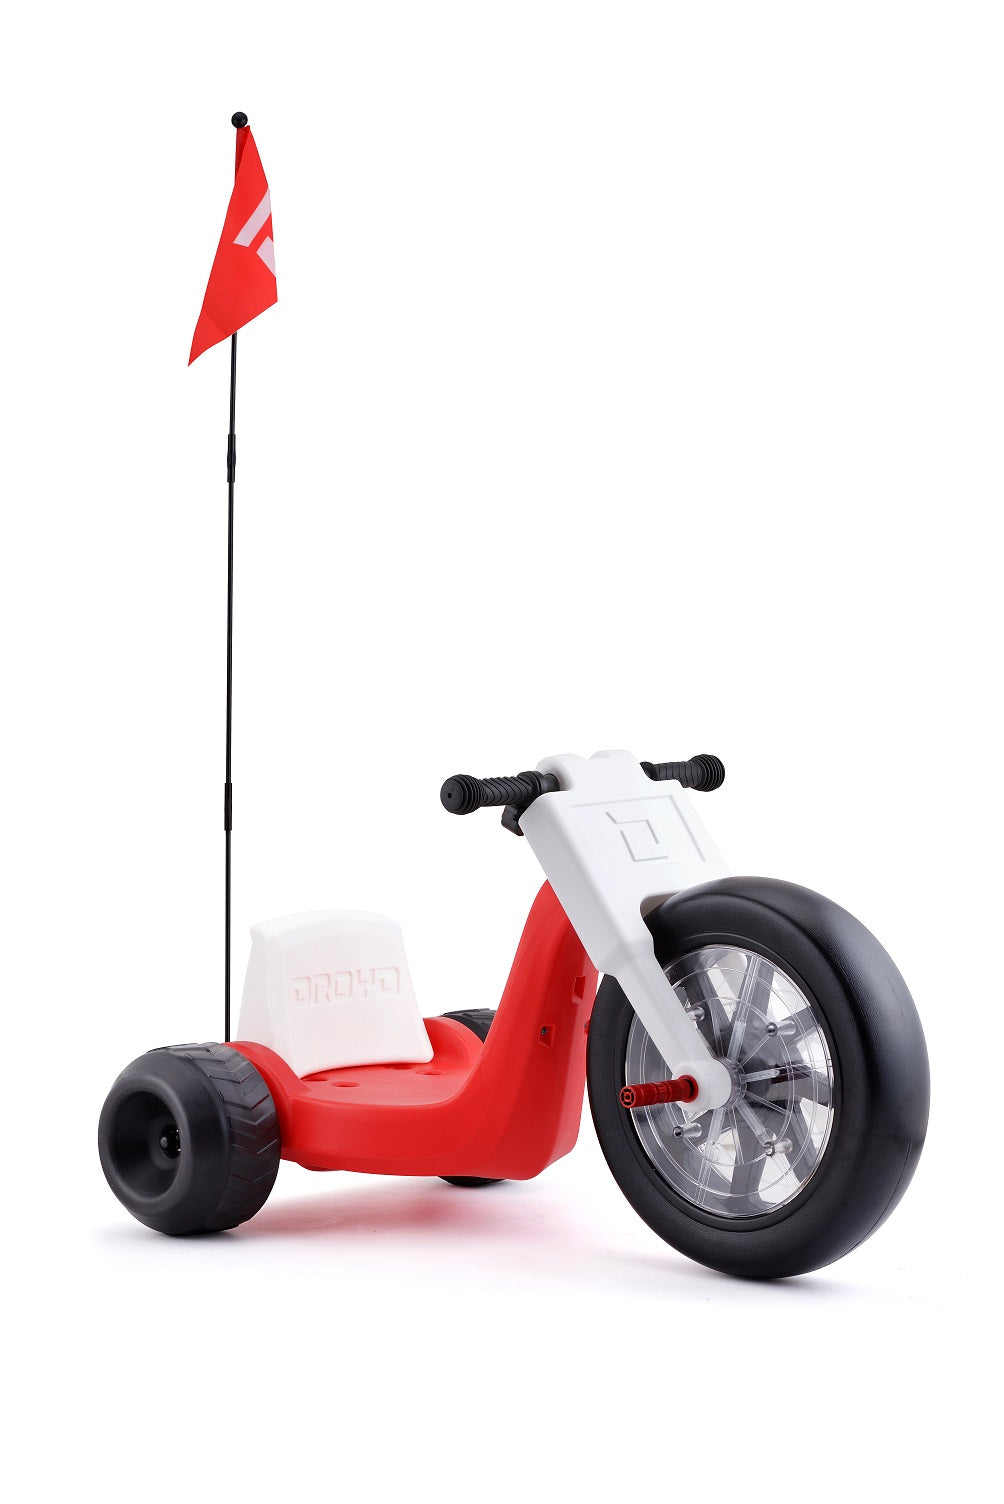 Romper product front view with red flag